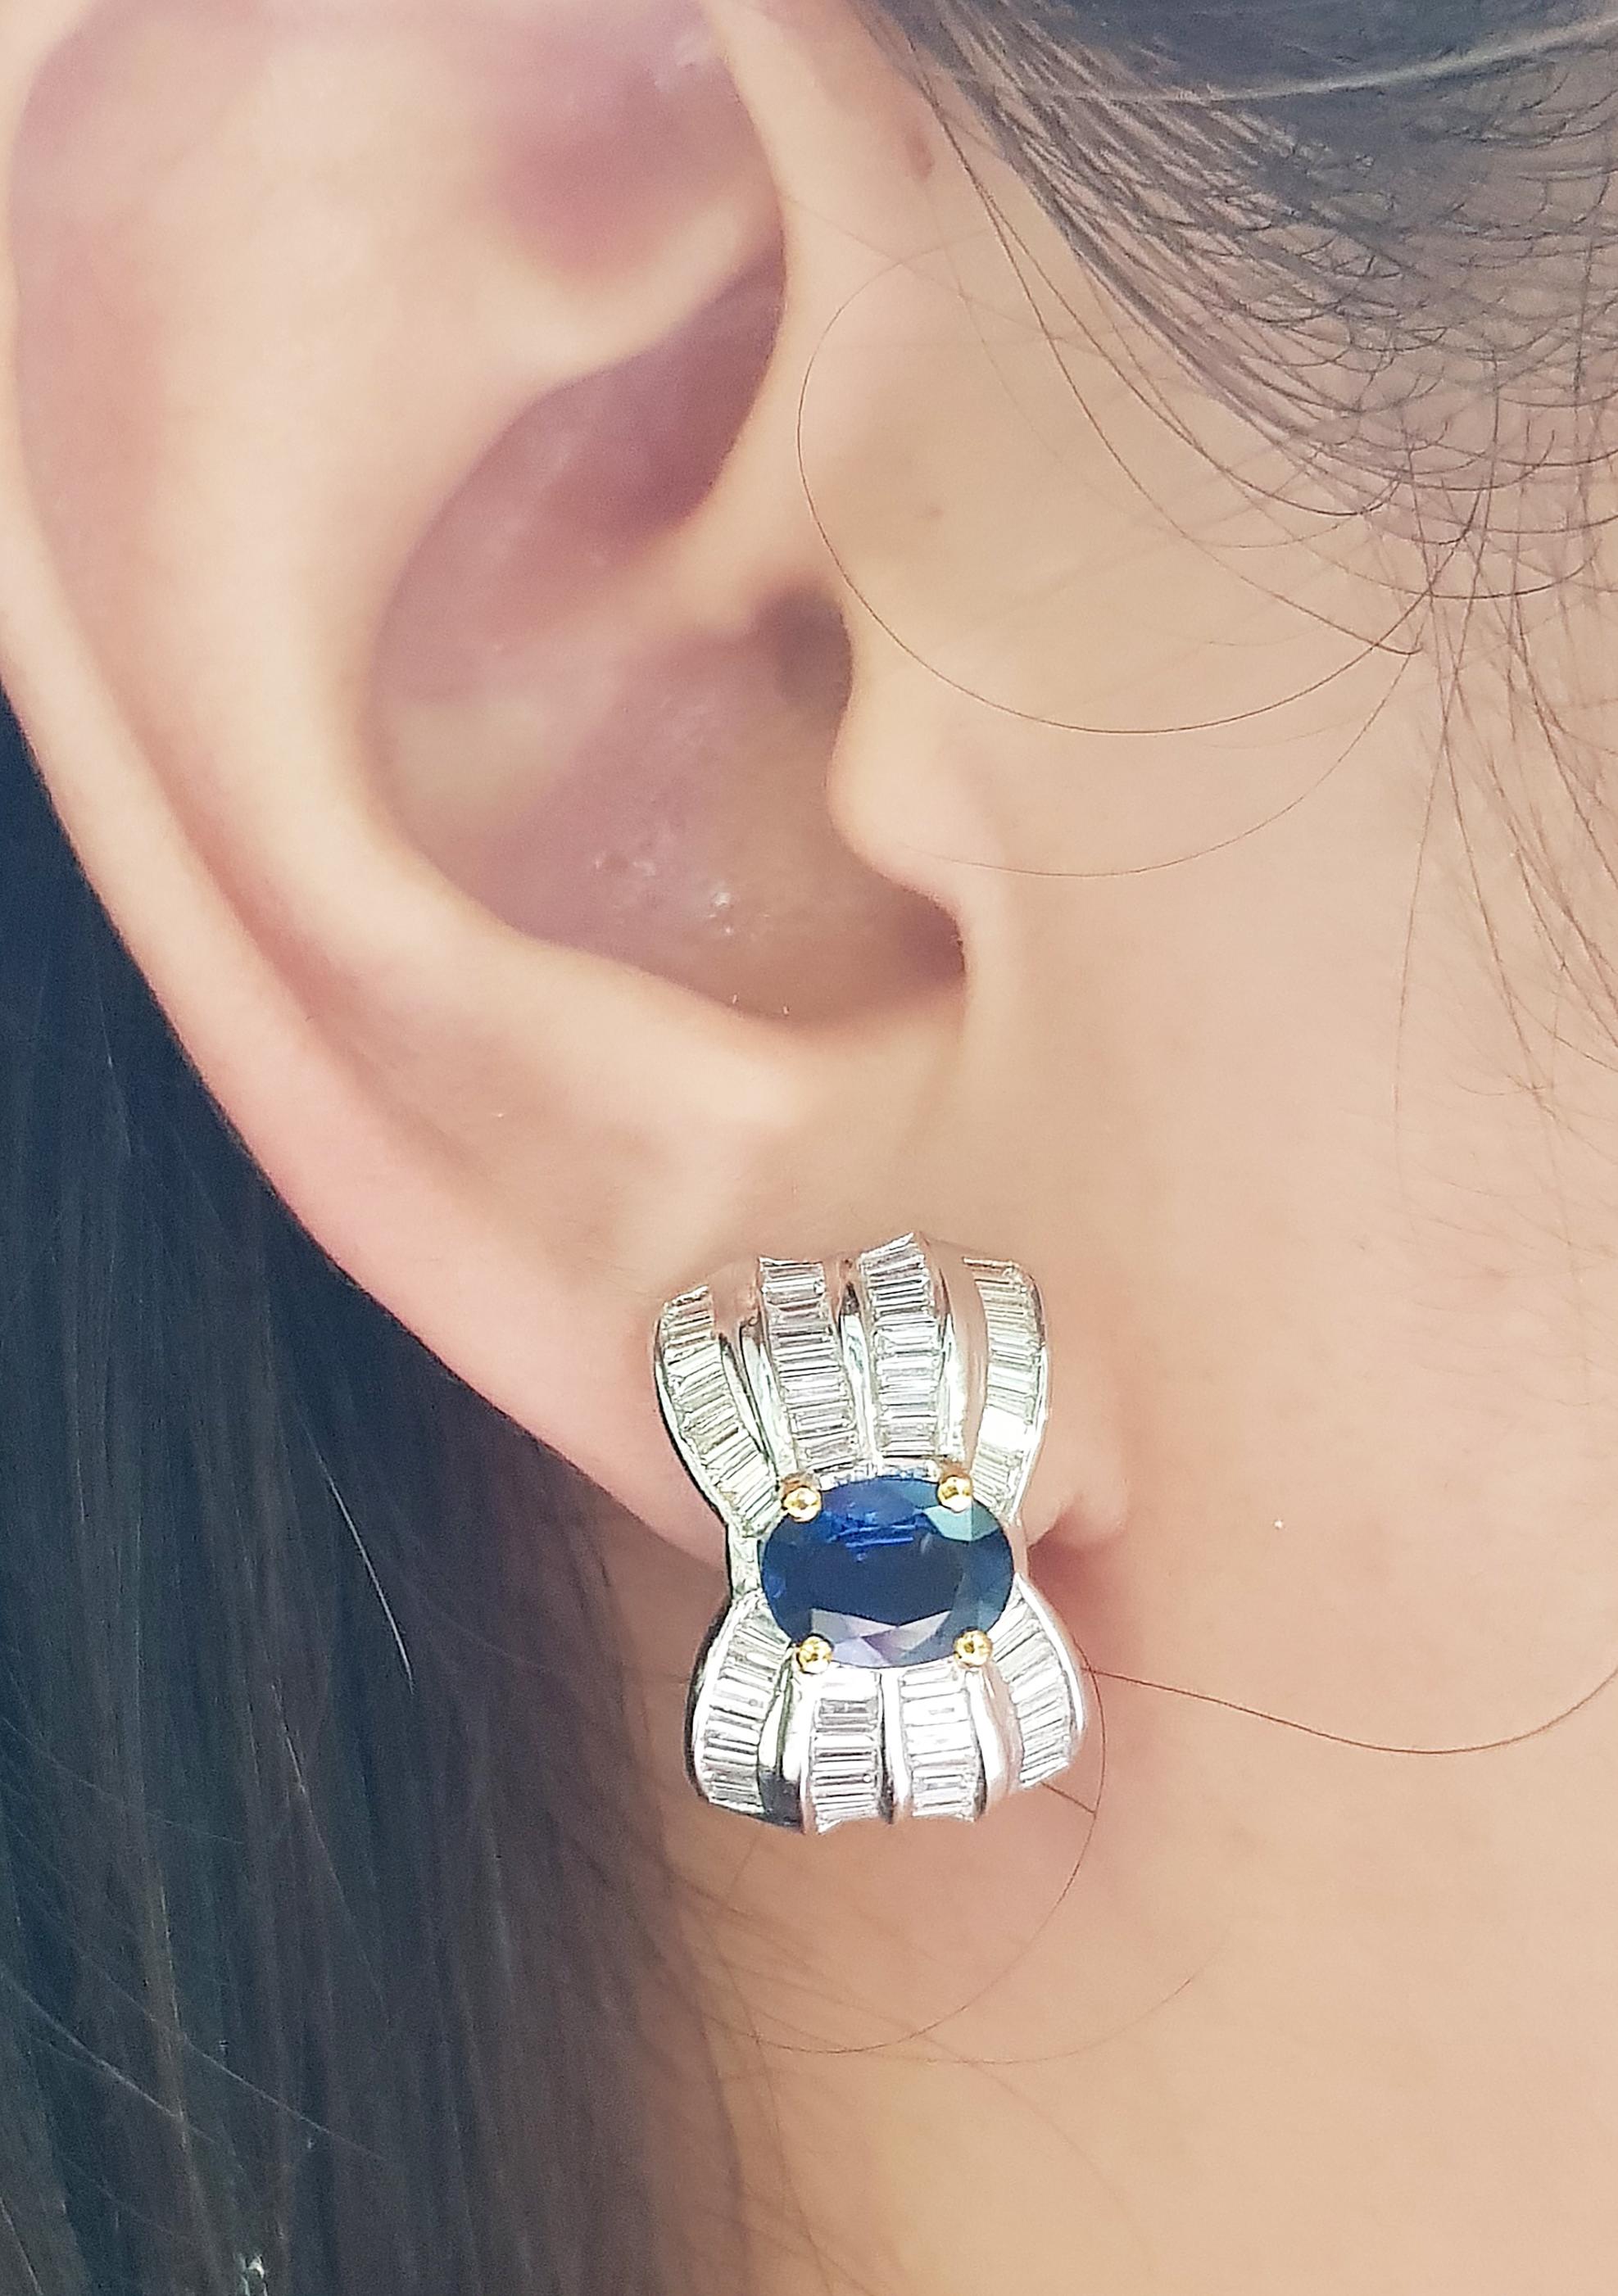 Blue Sapphire 2.64 carats with Diamond 2.70 carats Earrings set in 18 Karat Gold Settings

Width:  1.2 cm 
Length: 1.3 cm
Total Weight: 13.37 grams

